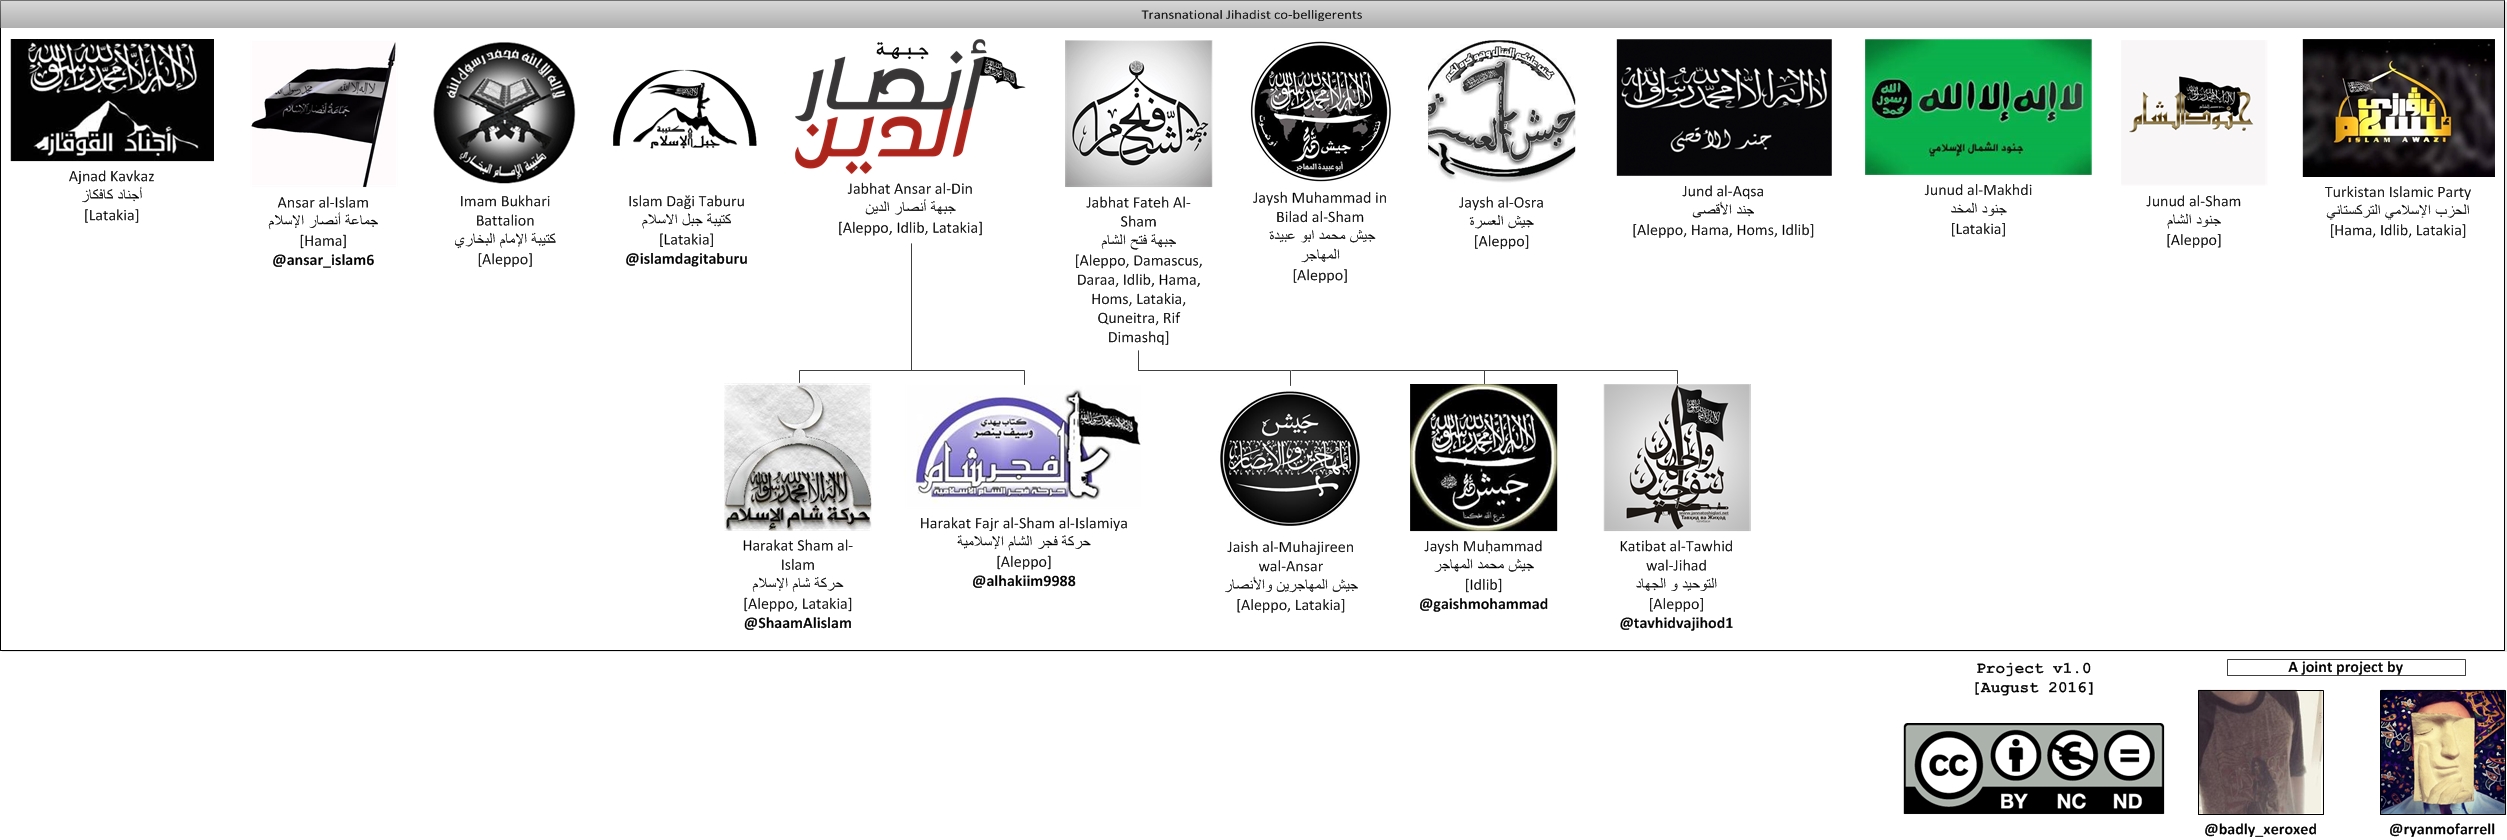 All transnational Jihadi co-belligerents in the Syrian Civil War